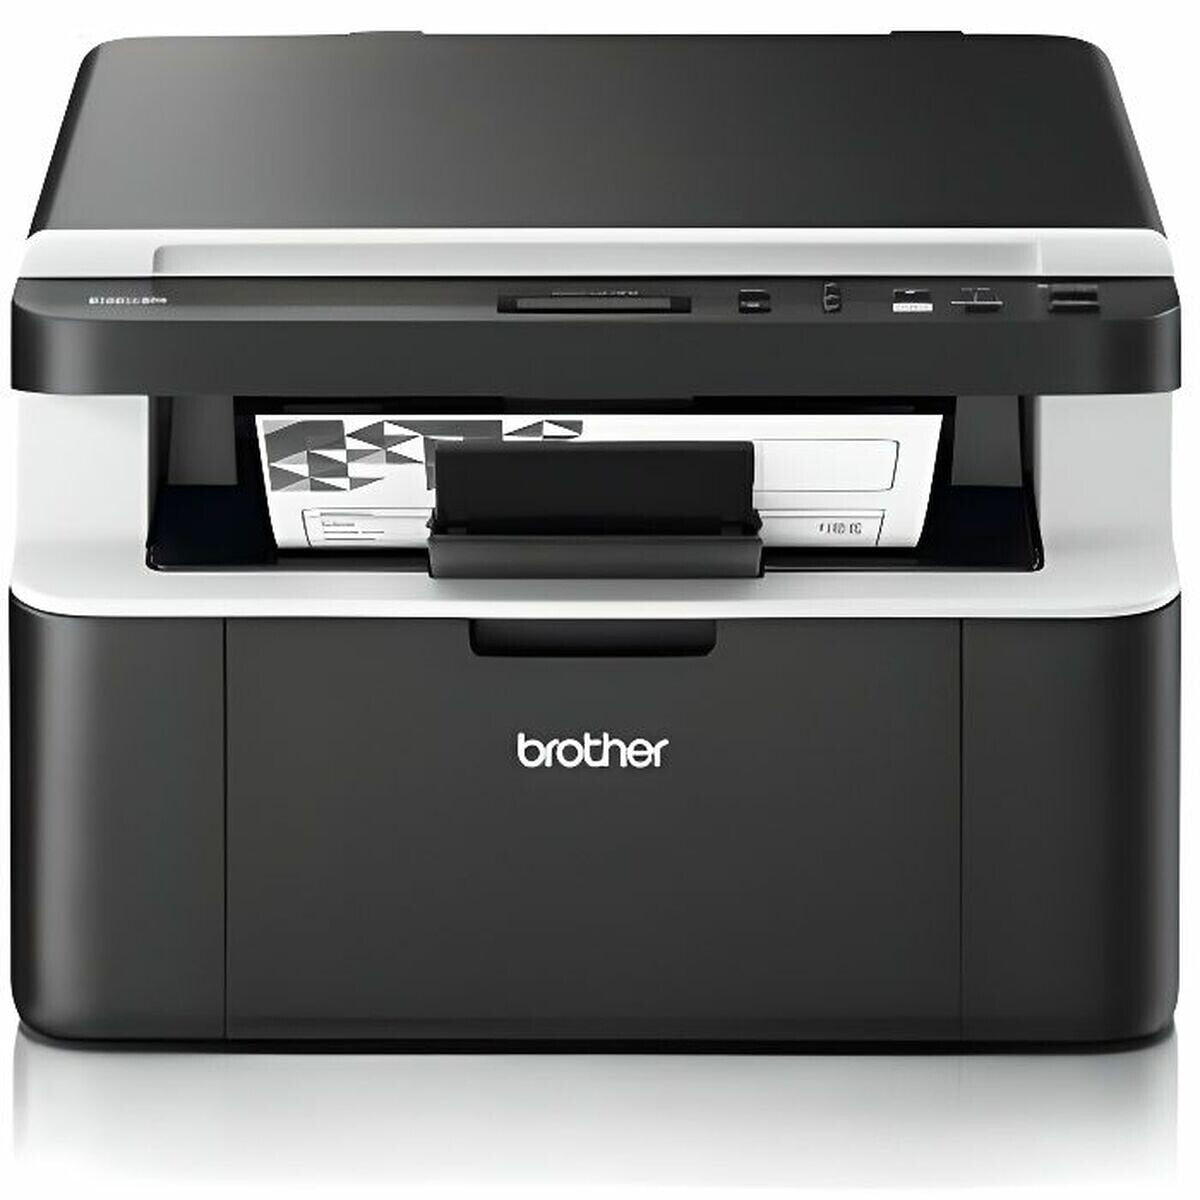 Multifunction Printer Brother DCP-1612W Wi-Fi A4